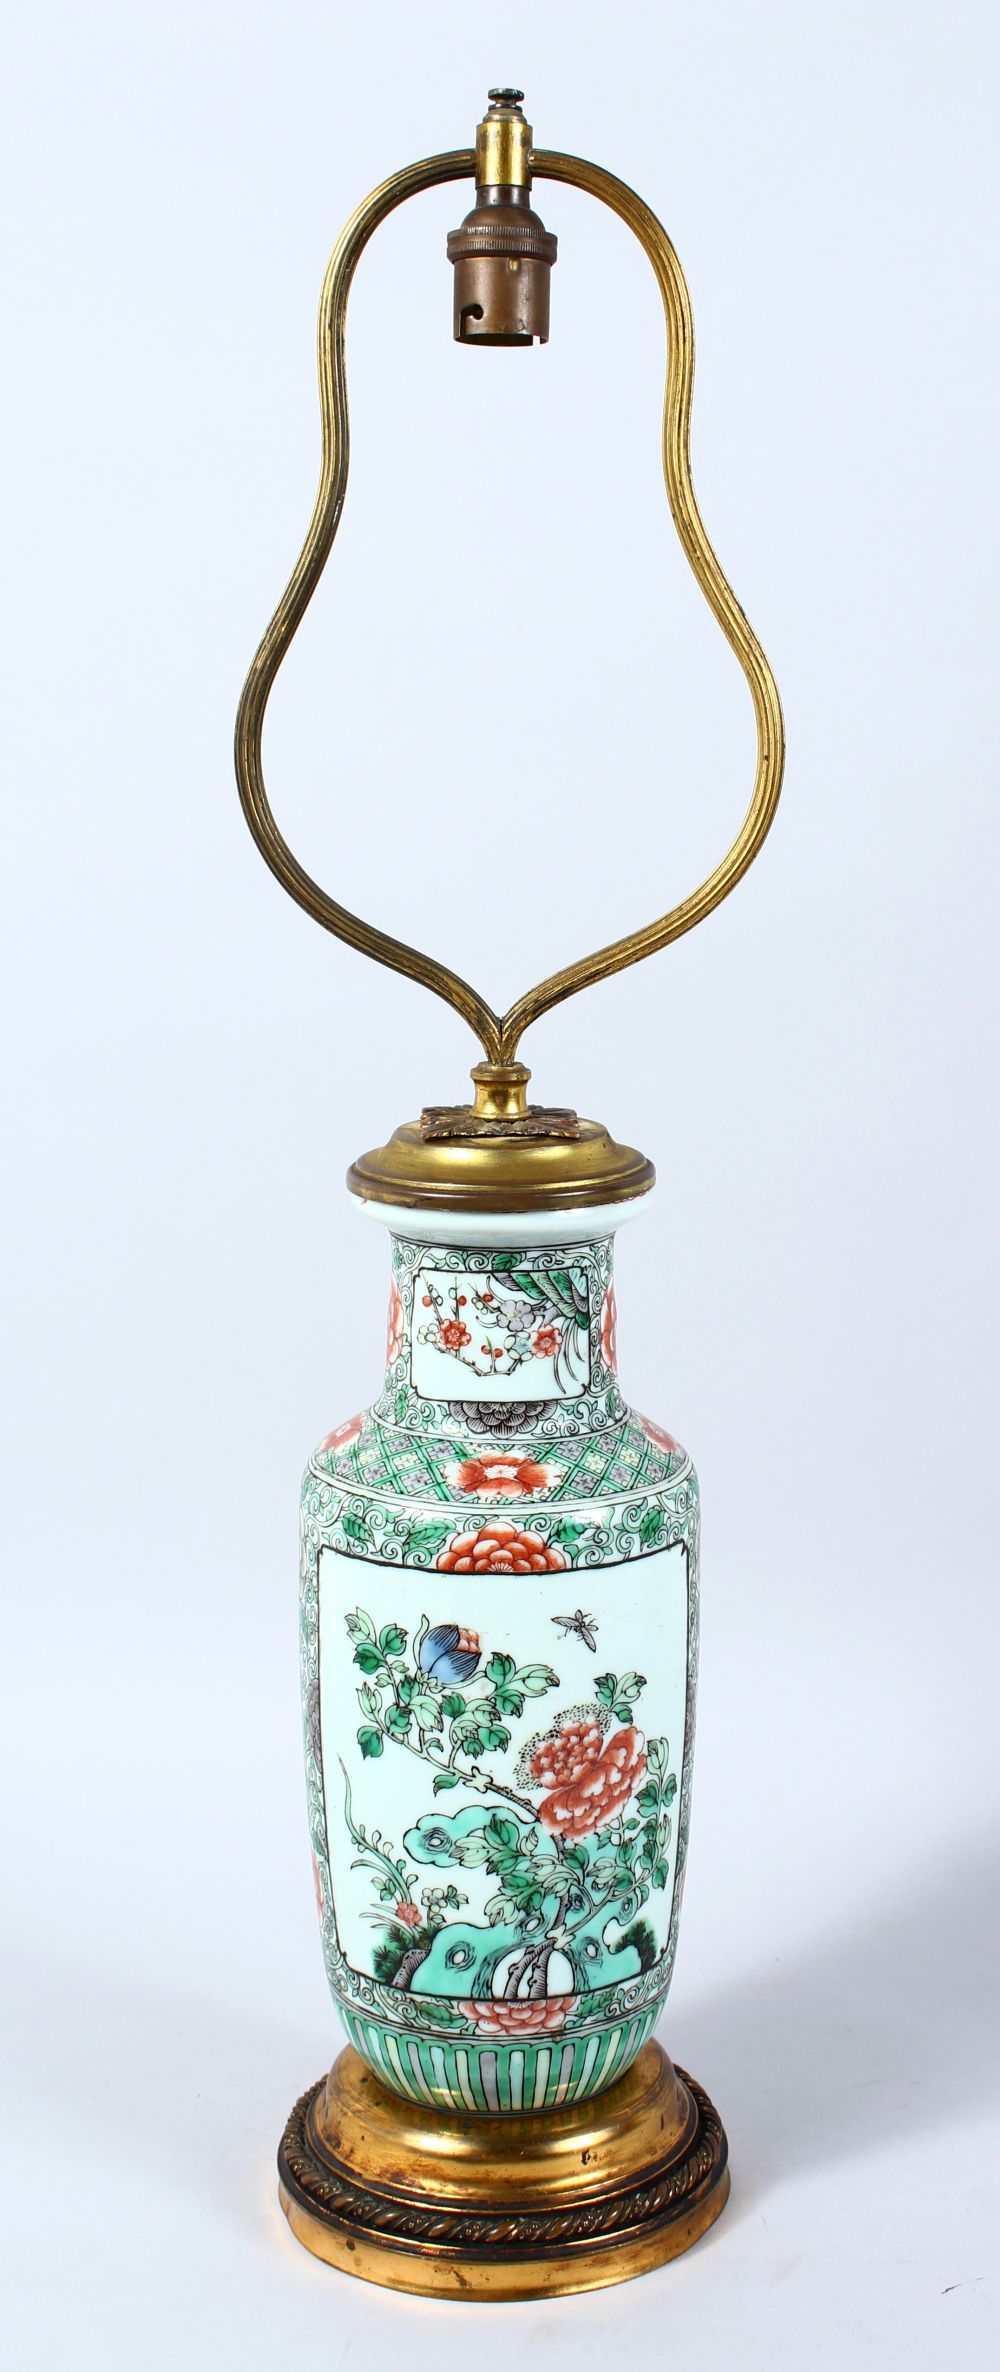 A CHINESE FAMILLE VERTE LAMPED VASE WITH BRONZE FITTINGS, vase finely painted with scenes of